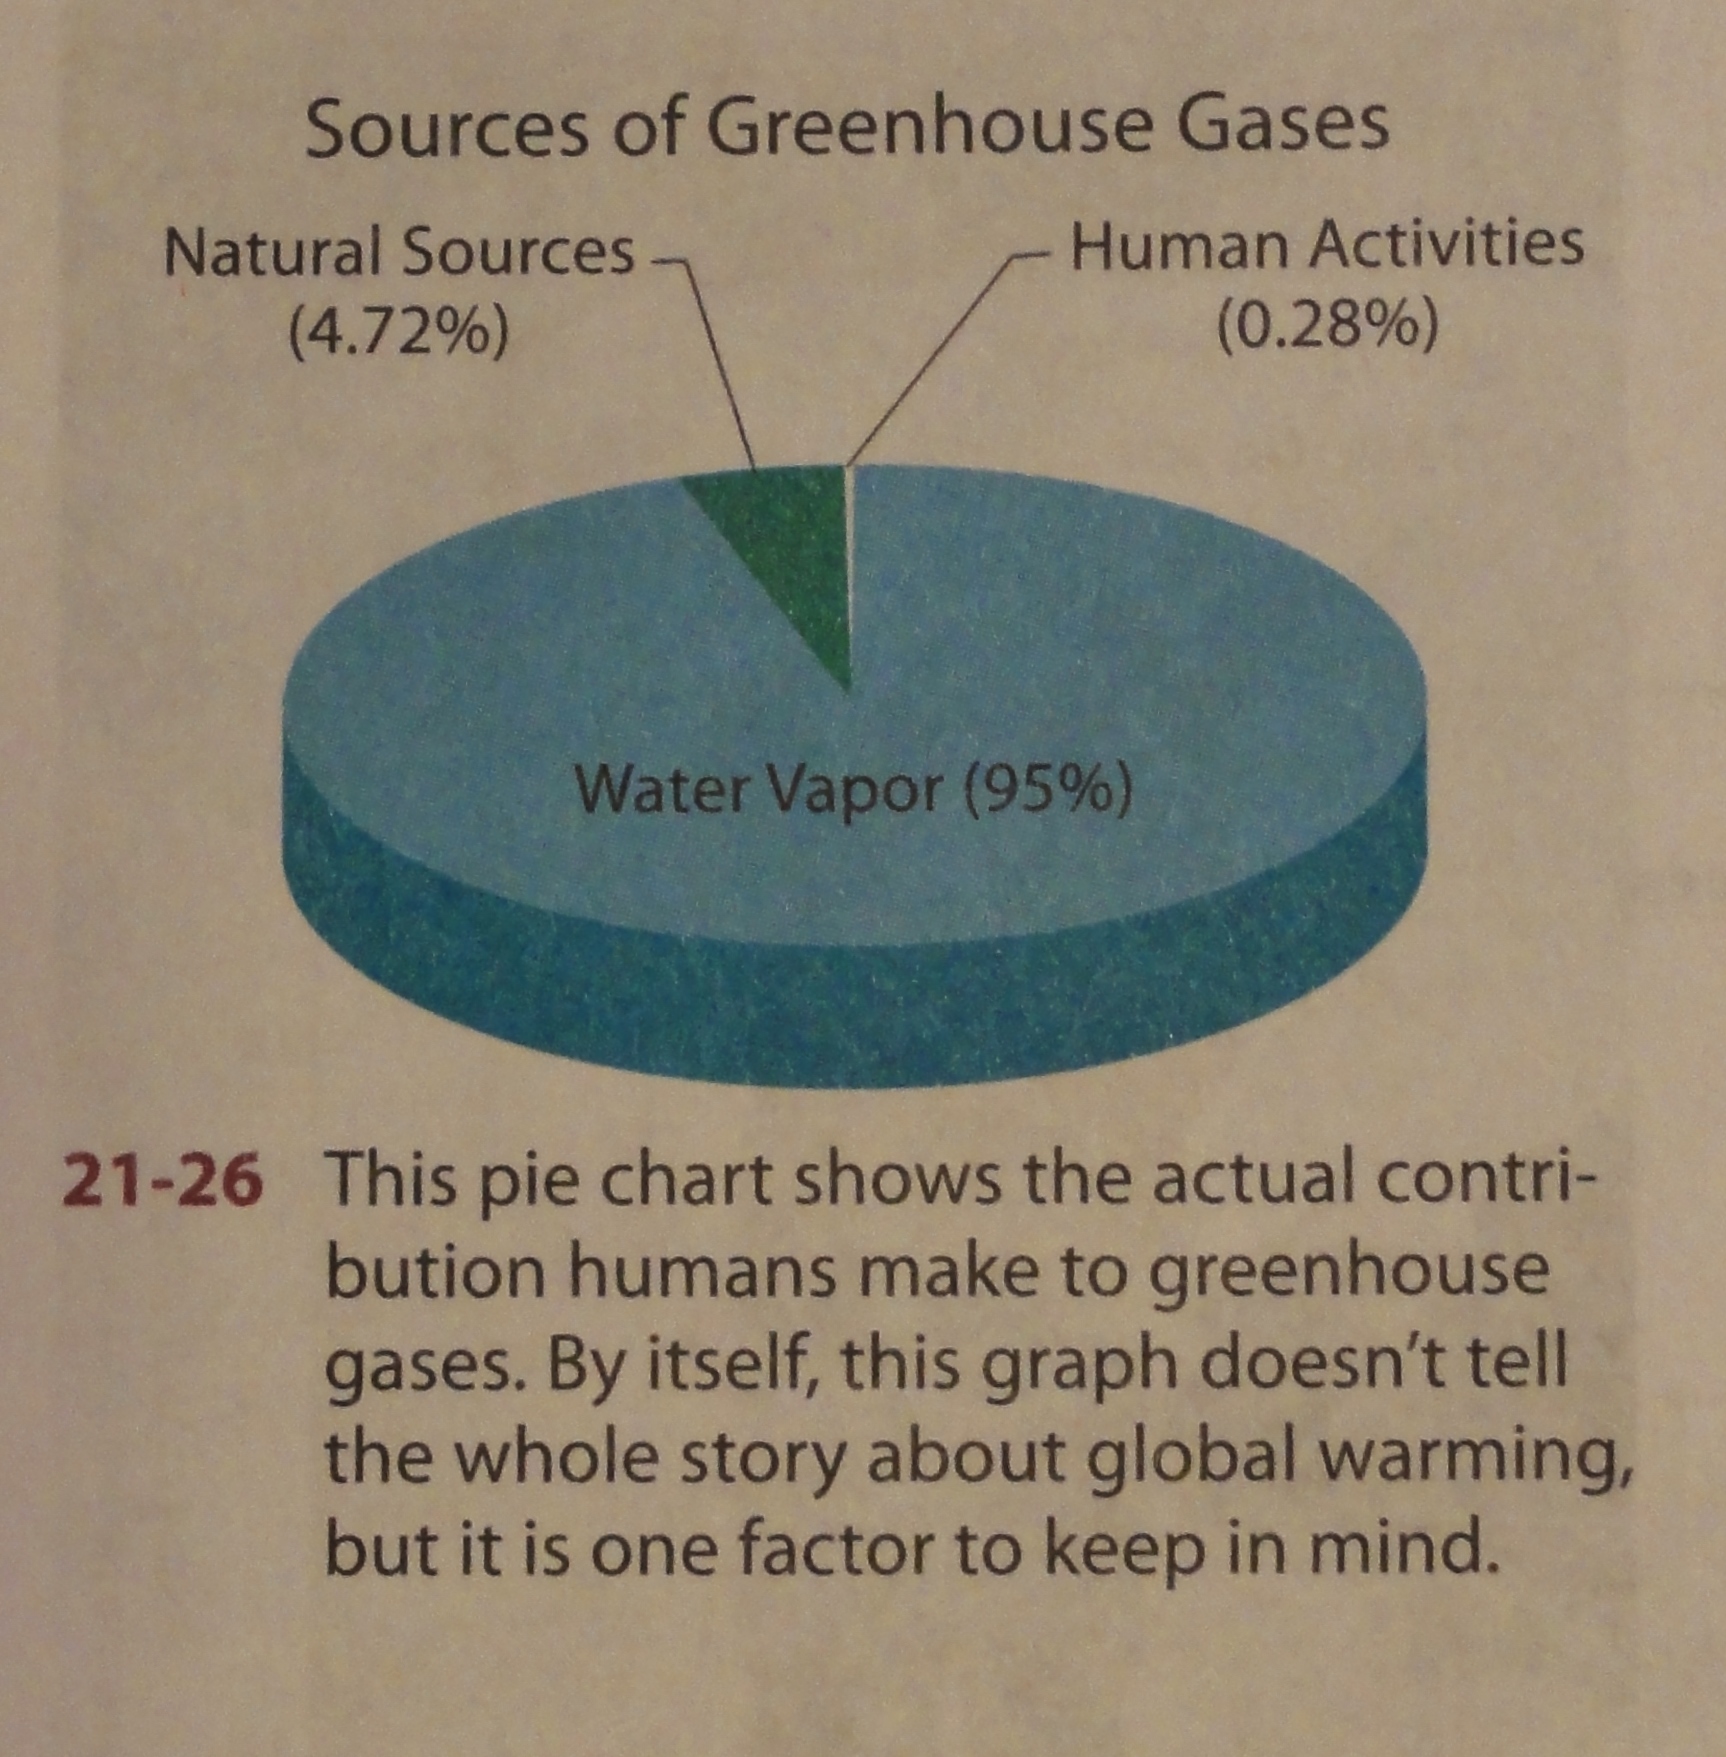 Image shows a pie chart saying Sources of Greenhouse Gasses. Natural Sources is marked as 4.72%, Human Activities as 0.28%, and Water Vapor as 95%. Caption says, "This pie chart shows the actual contribution humans make to greenhouse gasses. By itself, this graph doesn't tell the whole story about global warming, but it is one factor to keep in mind."